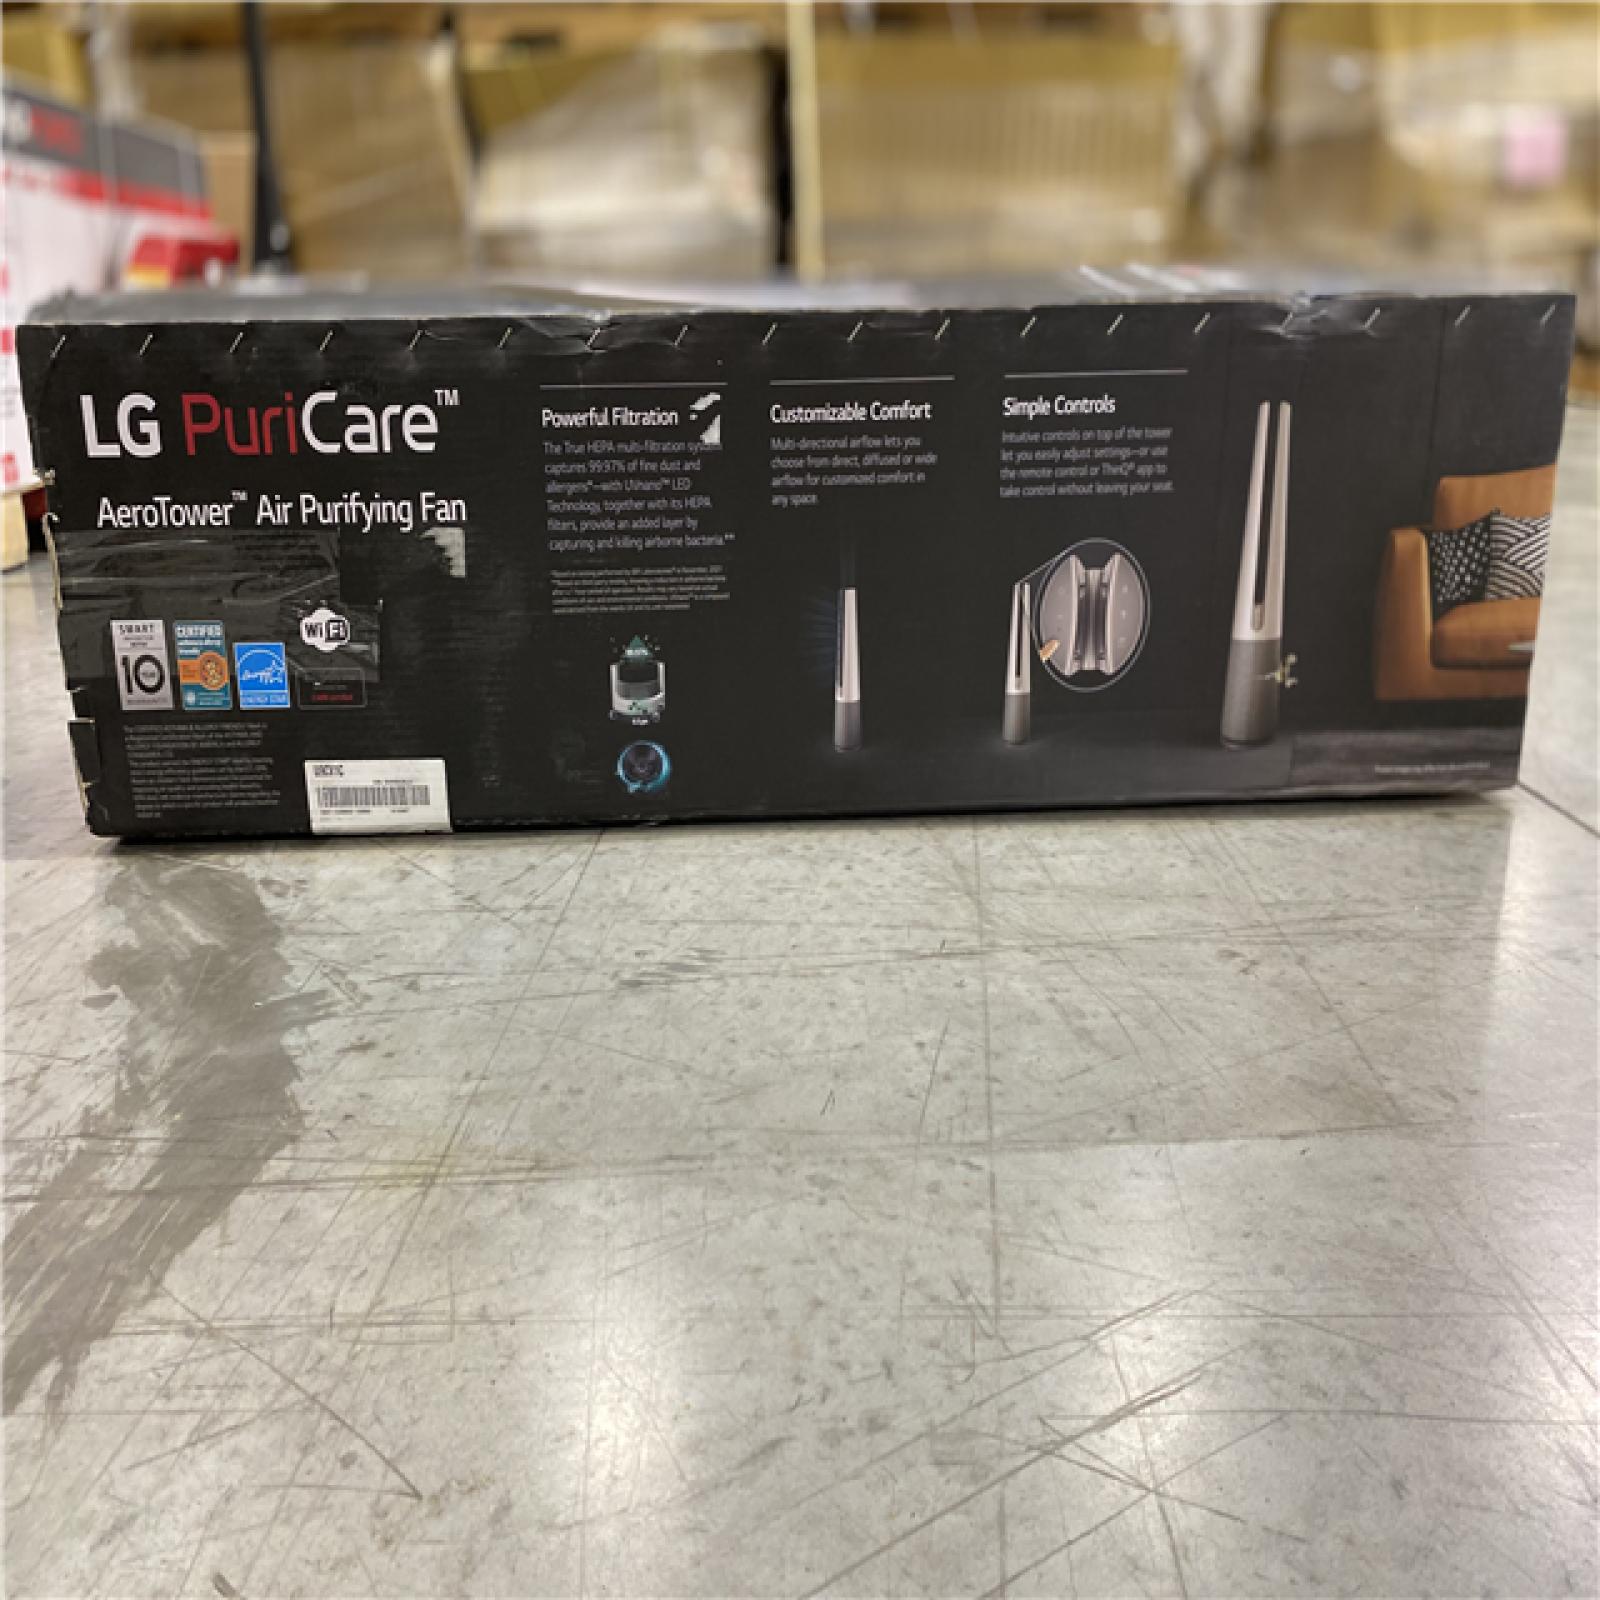 DALLAS LOCATION- NEW! LG LG PuriCare AeroTower True HEPA Air Purifying Fan for Allergens